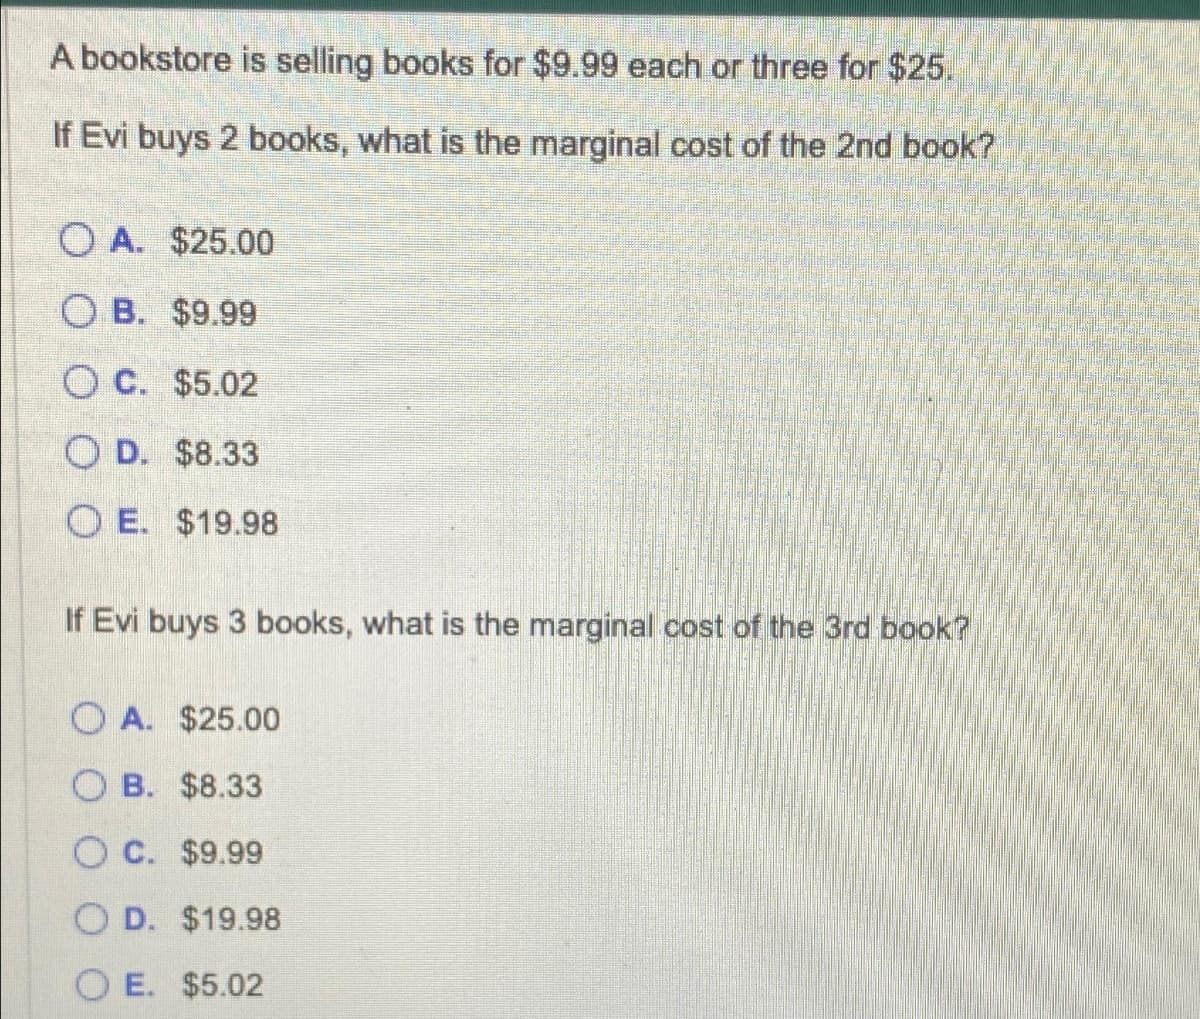 A bookstore is selling books for $9.99 each or three for $25.
If Evi buys 2 books, what is the marginal cost of the 2nd book?
OA. $25.00
OB. $9.99
OC. $5.02
OD. $8.33
OE. $19.98
If Evi buys 3 books, what is the marginal cost of the 3rd book?
OA. $25.00
OB. $8.33
OC. $9.99
OD. $19.98
OE. $5.02